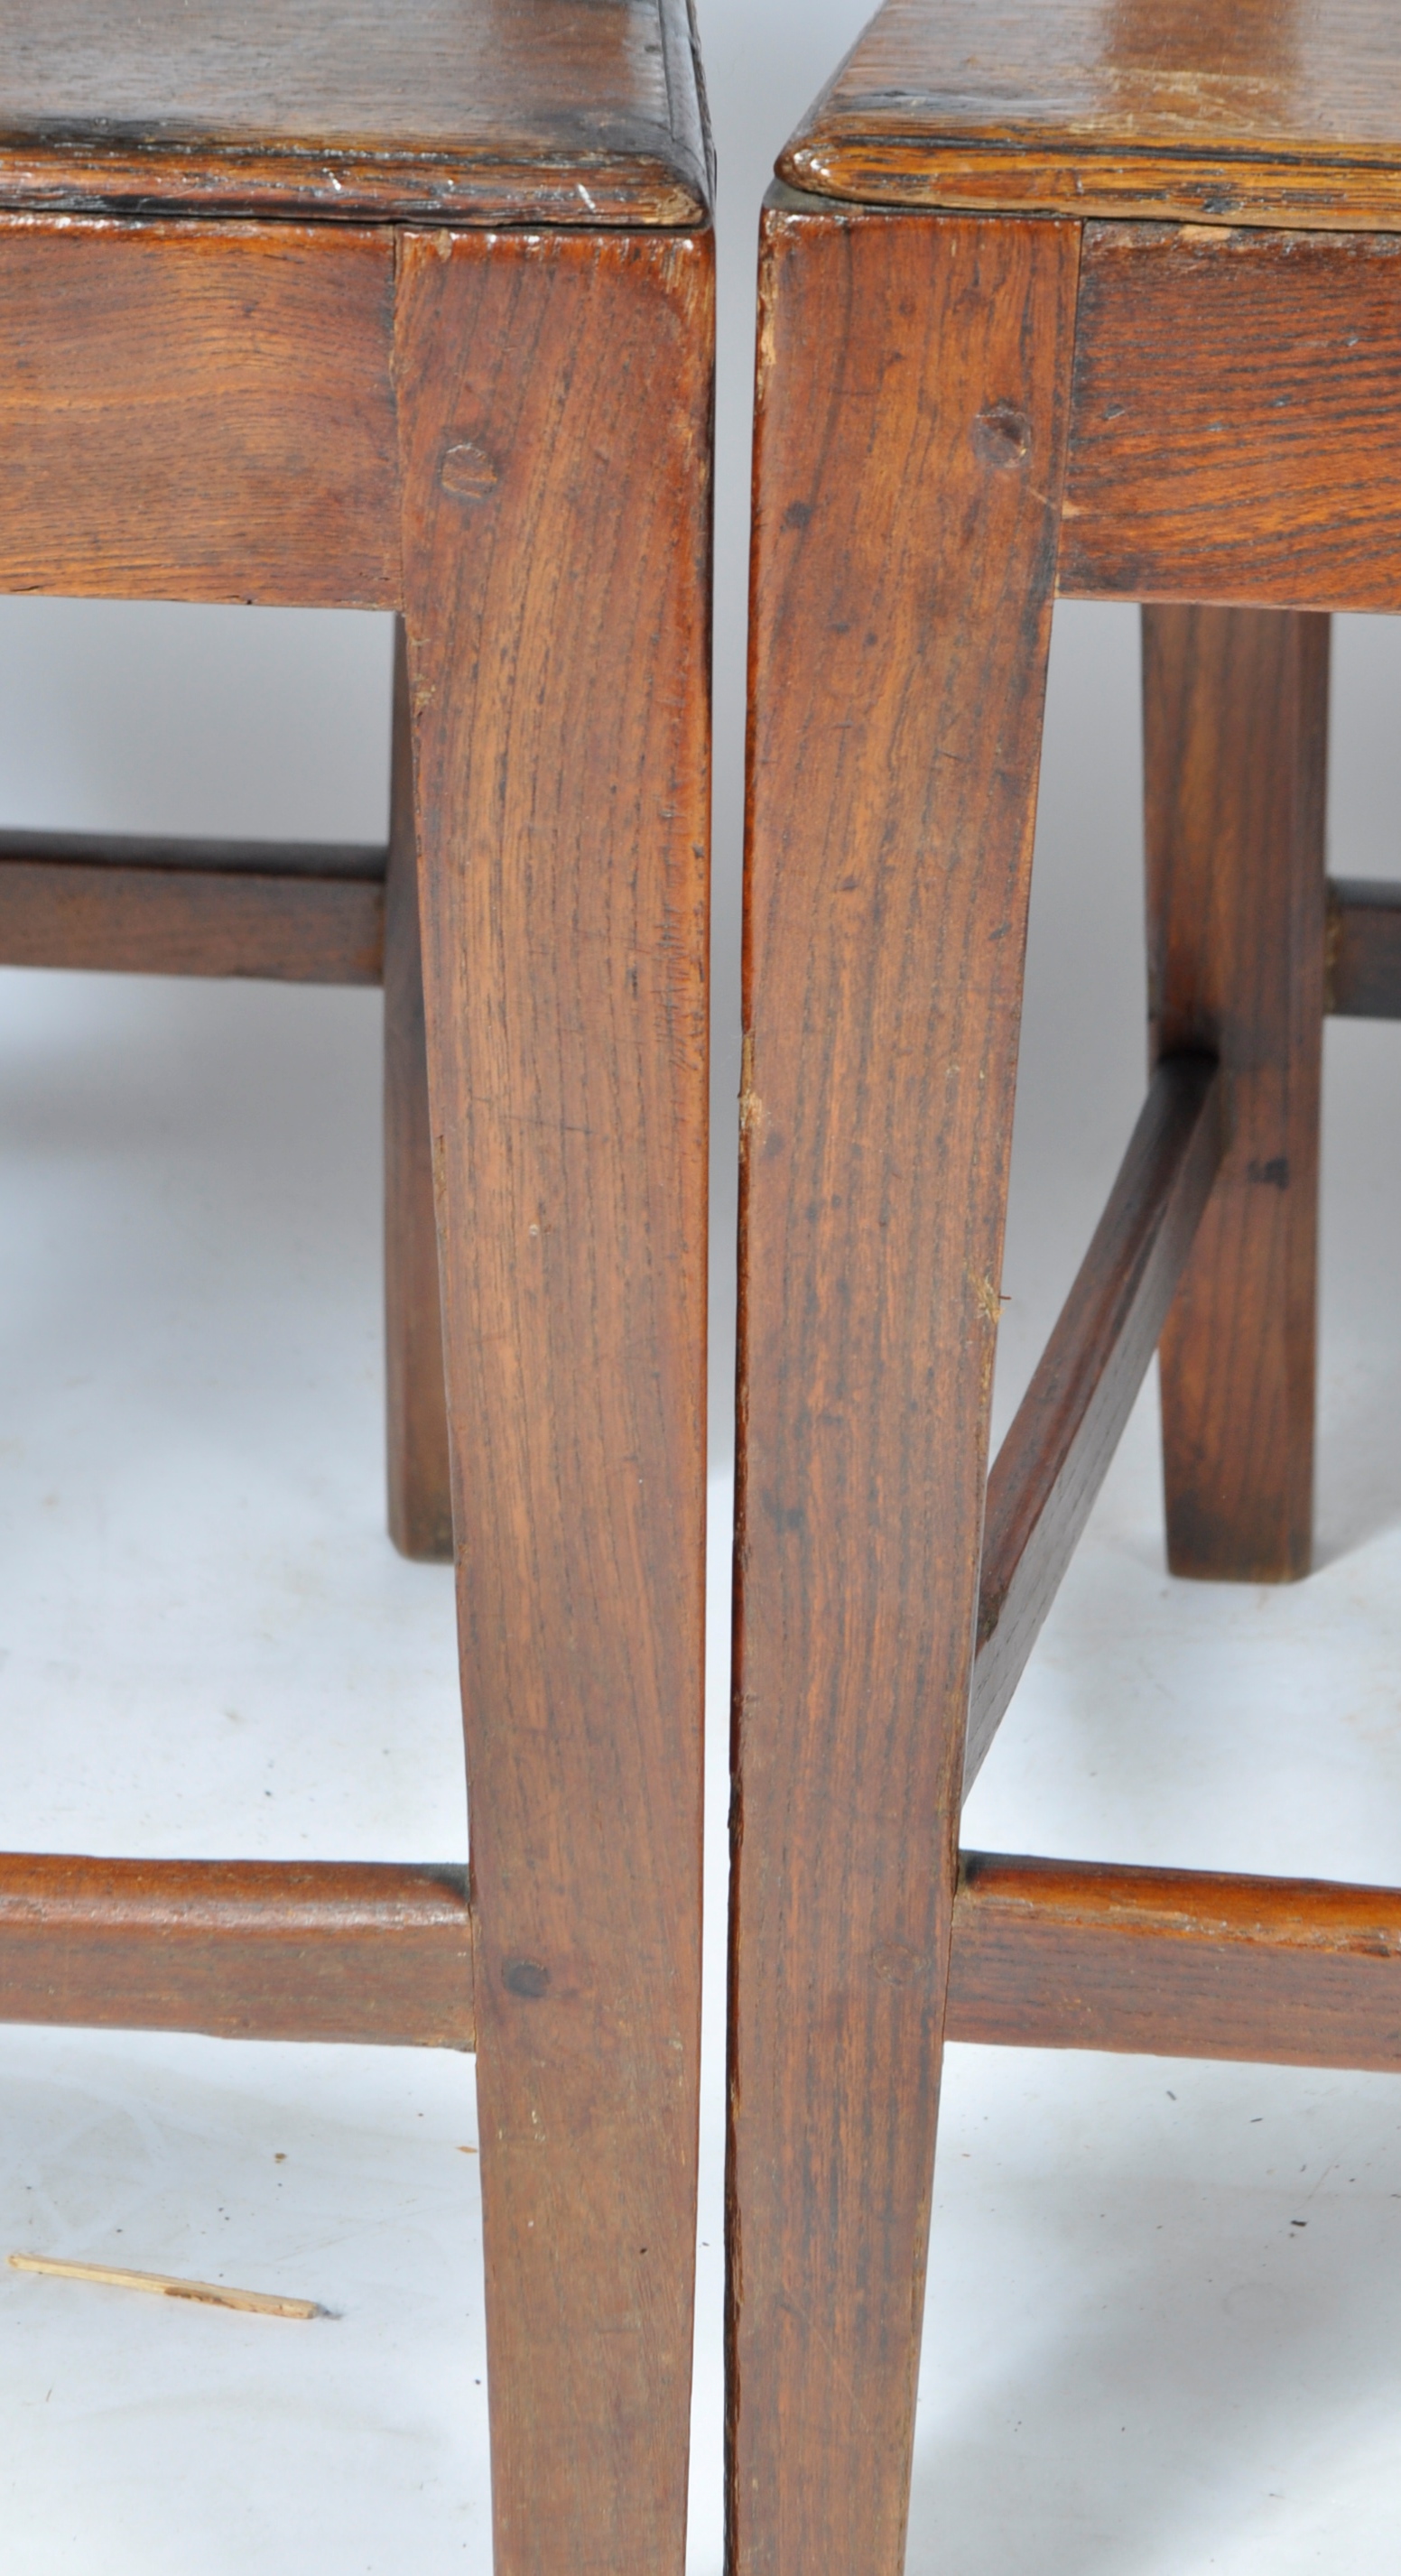 SET OF SIX 18TH CENTURY CHIPPENDALE STYLE OAK & ELM DINING CHAIRS - Image 6 of 11